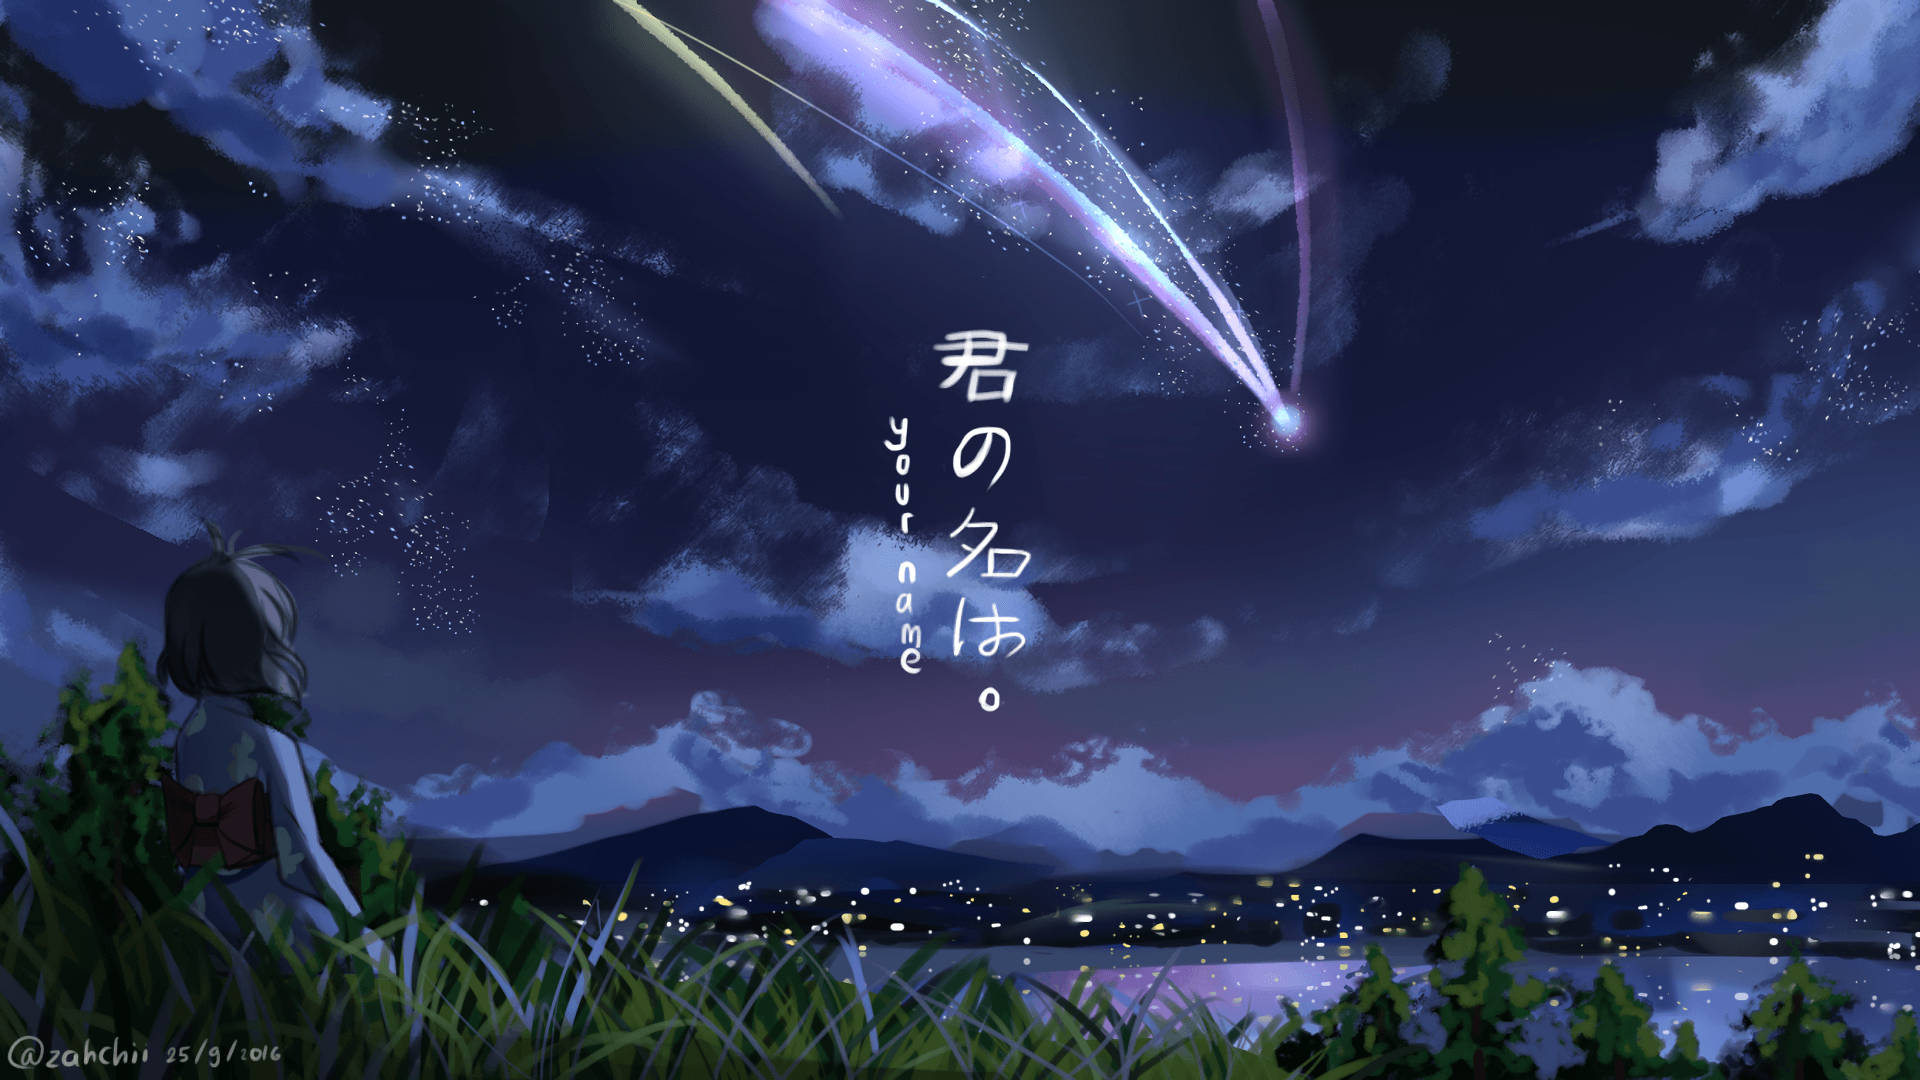 Your Name 1920X1080 Wallpaper and Background Image